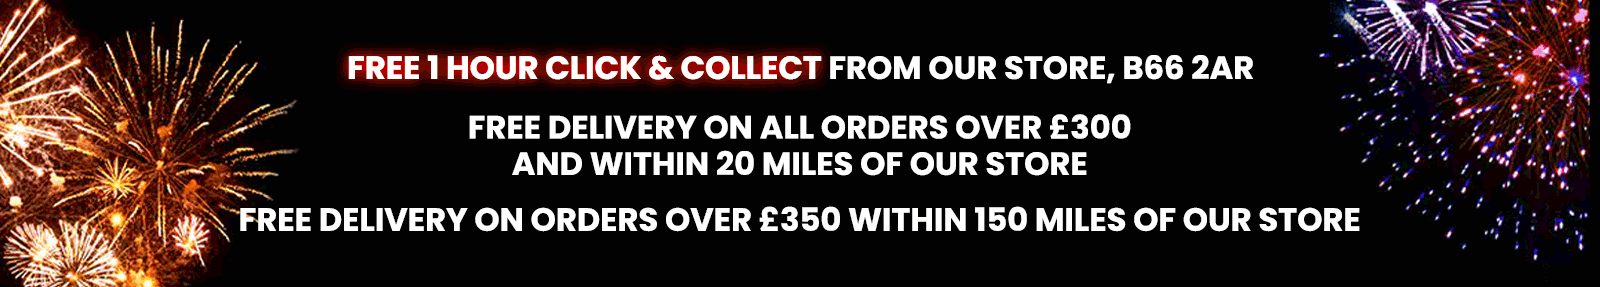 Spend £350 or over & get free delivery up to a 150 mile radius around birmingham